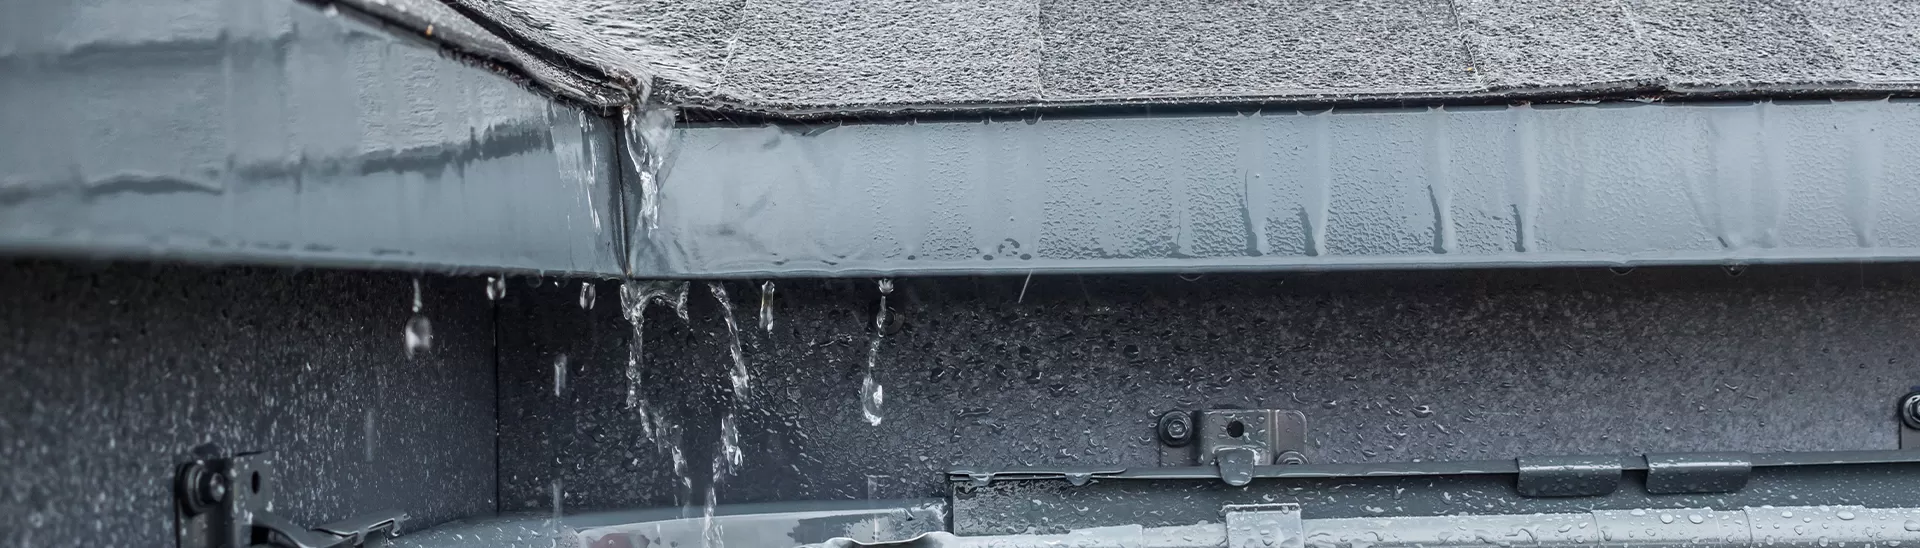 Don't Let Rain Ruin Your Home: Top Roof Leakage Solutions